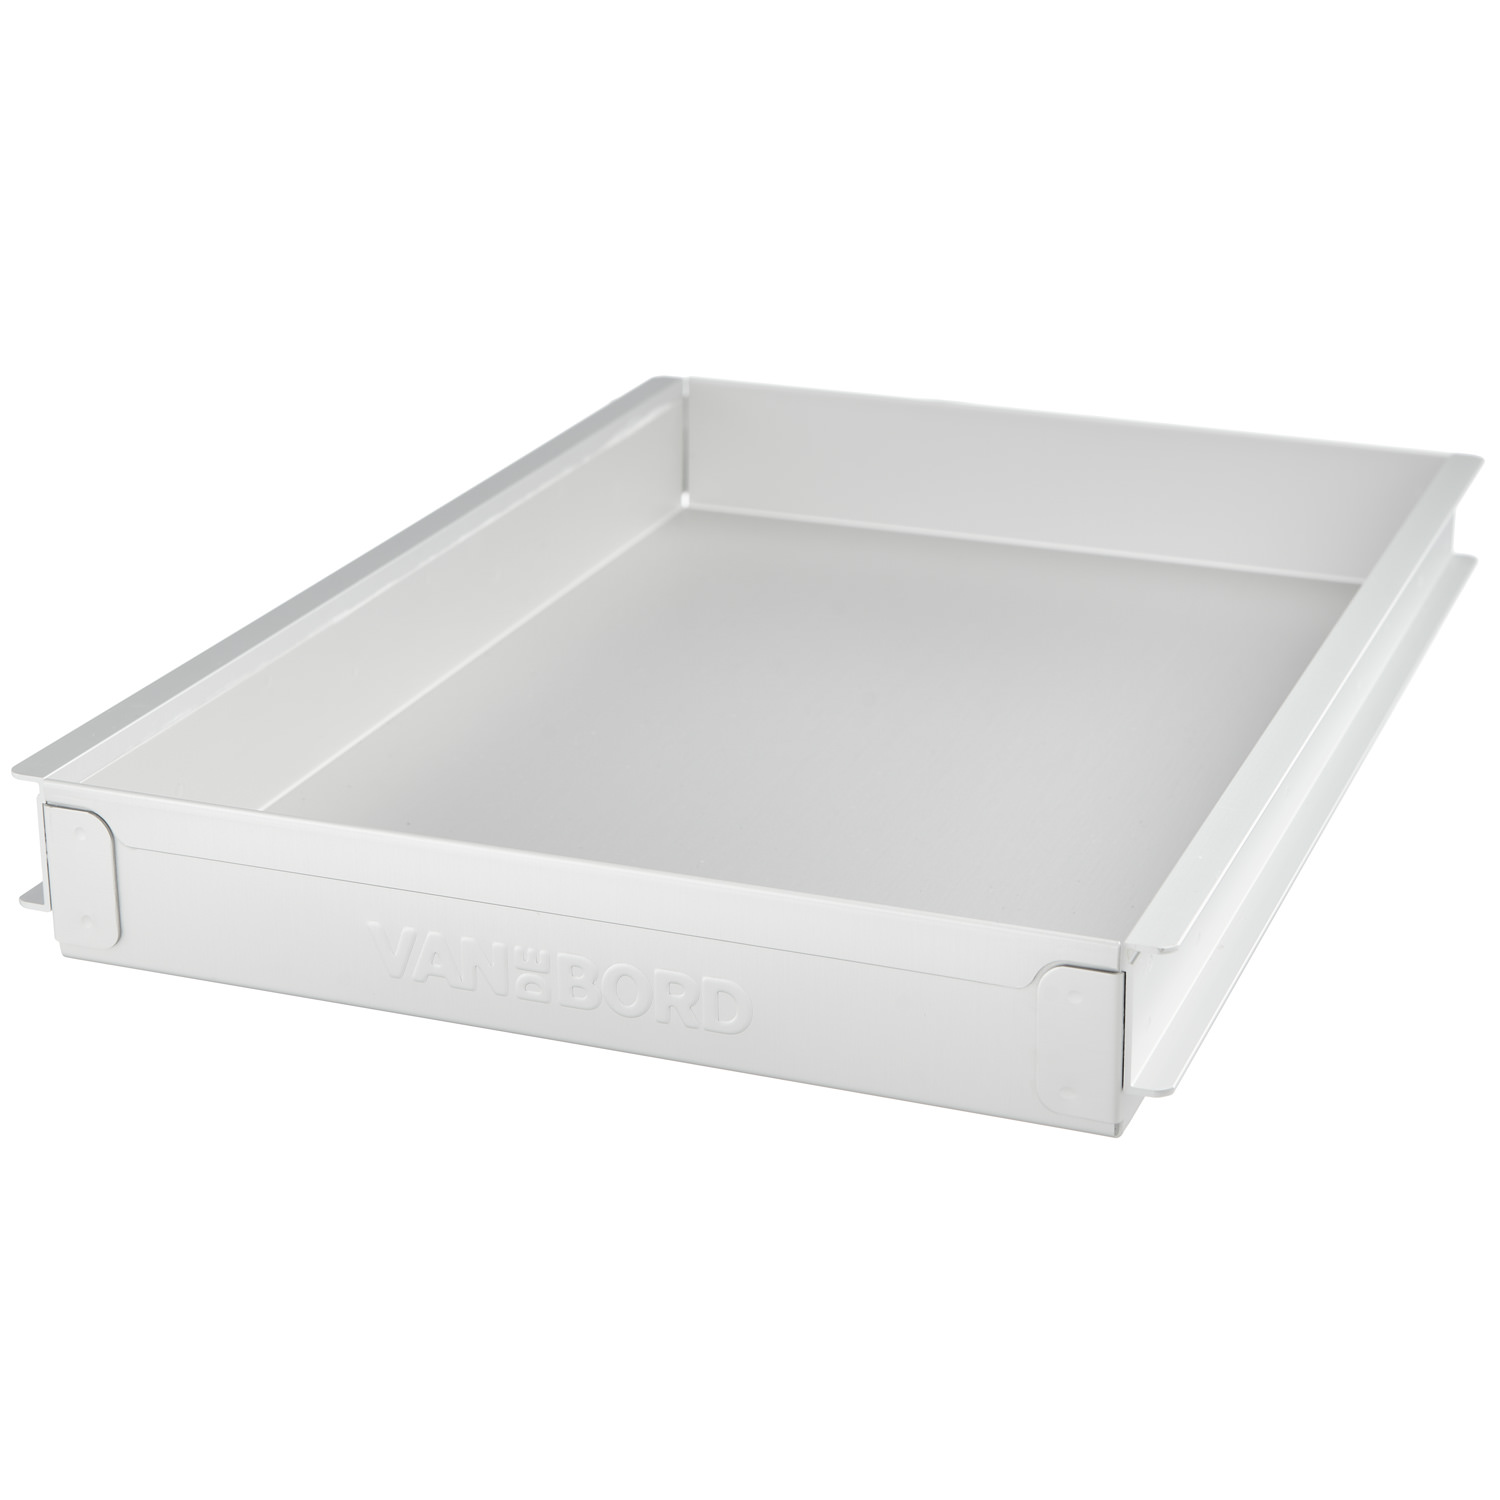 Aluminum Drawer S for Airline Trolleys & Aviation Boxes ATLAS